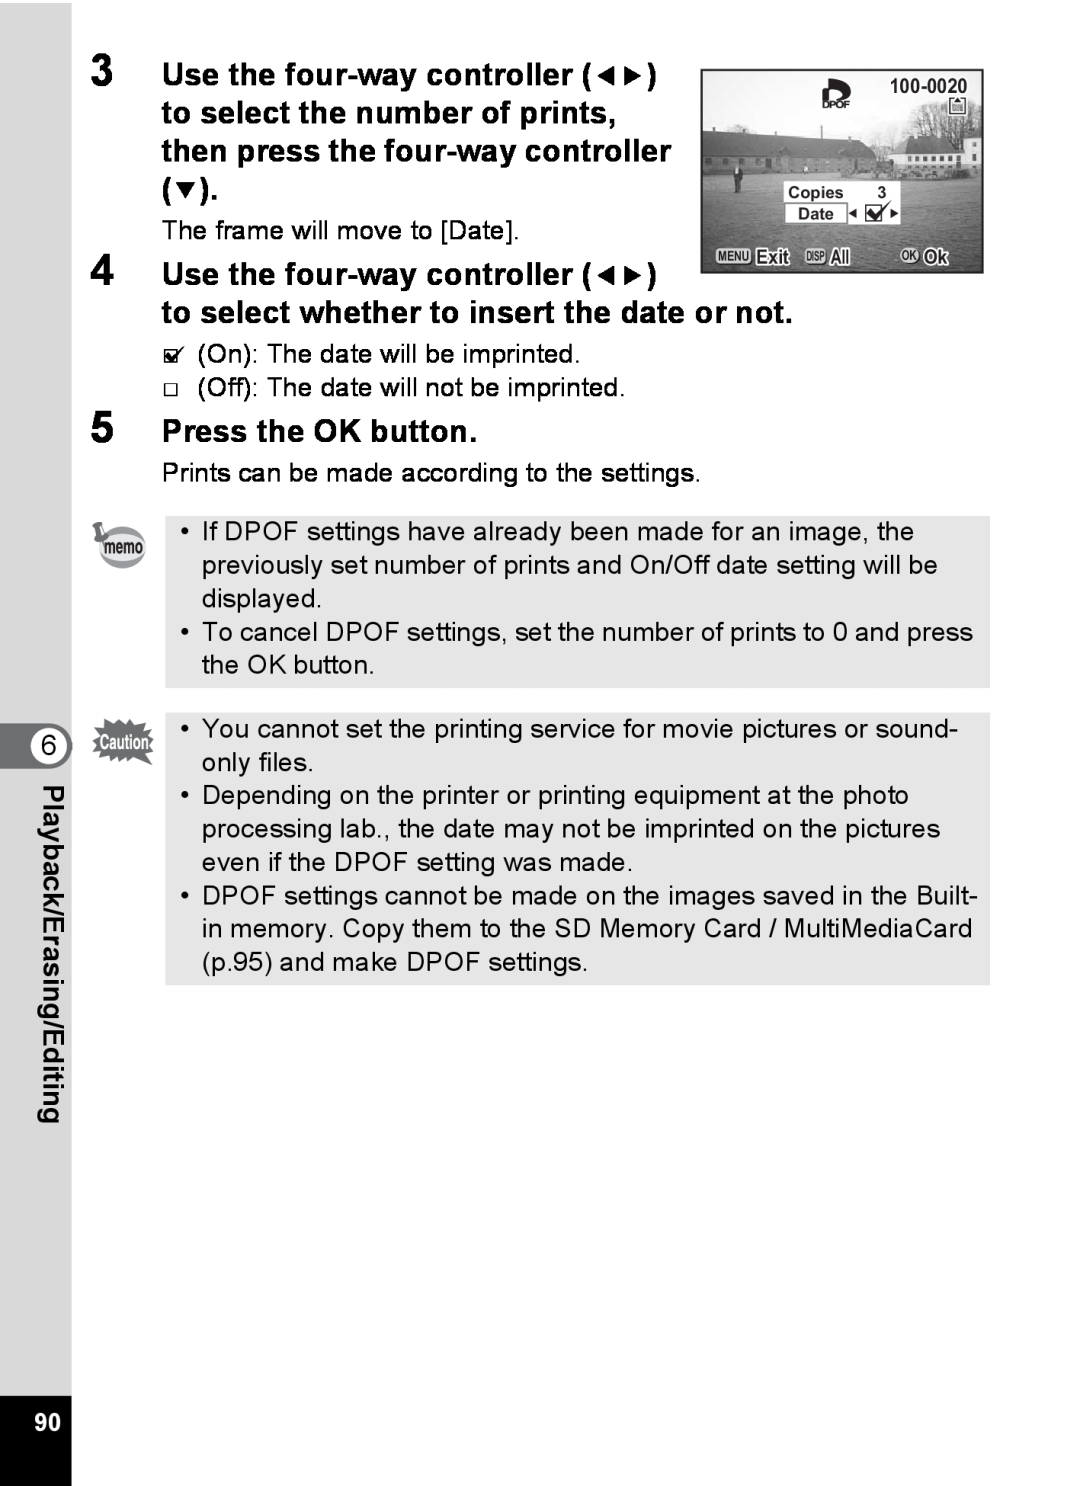 Pentax S4 to select the number of prints, then press the four-way controller, to select whether to insert the date or not 